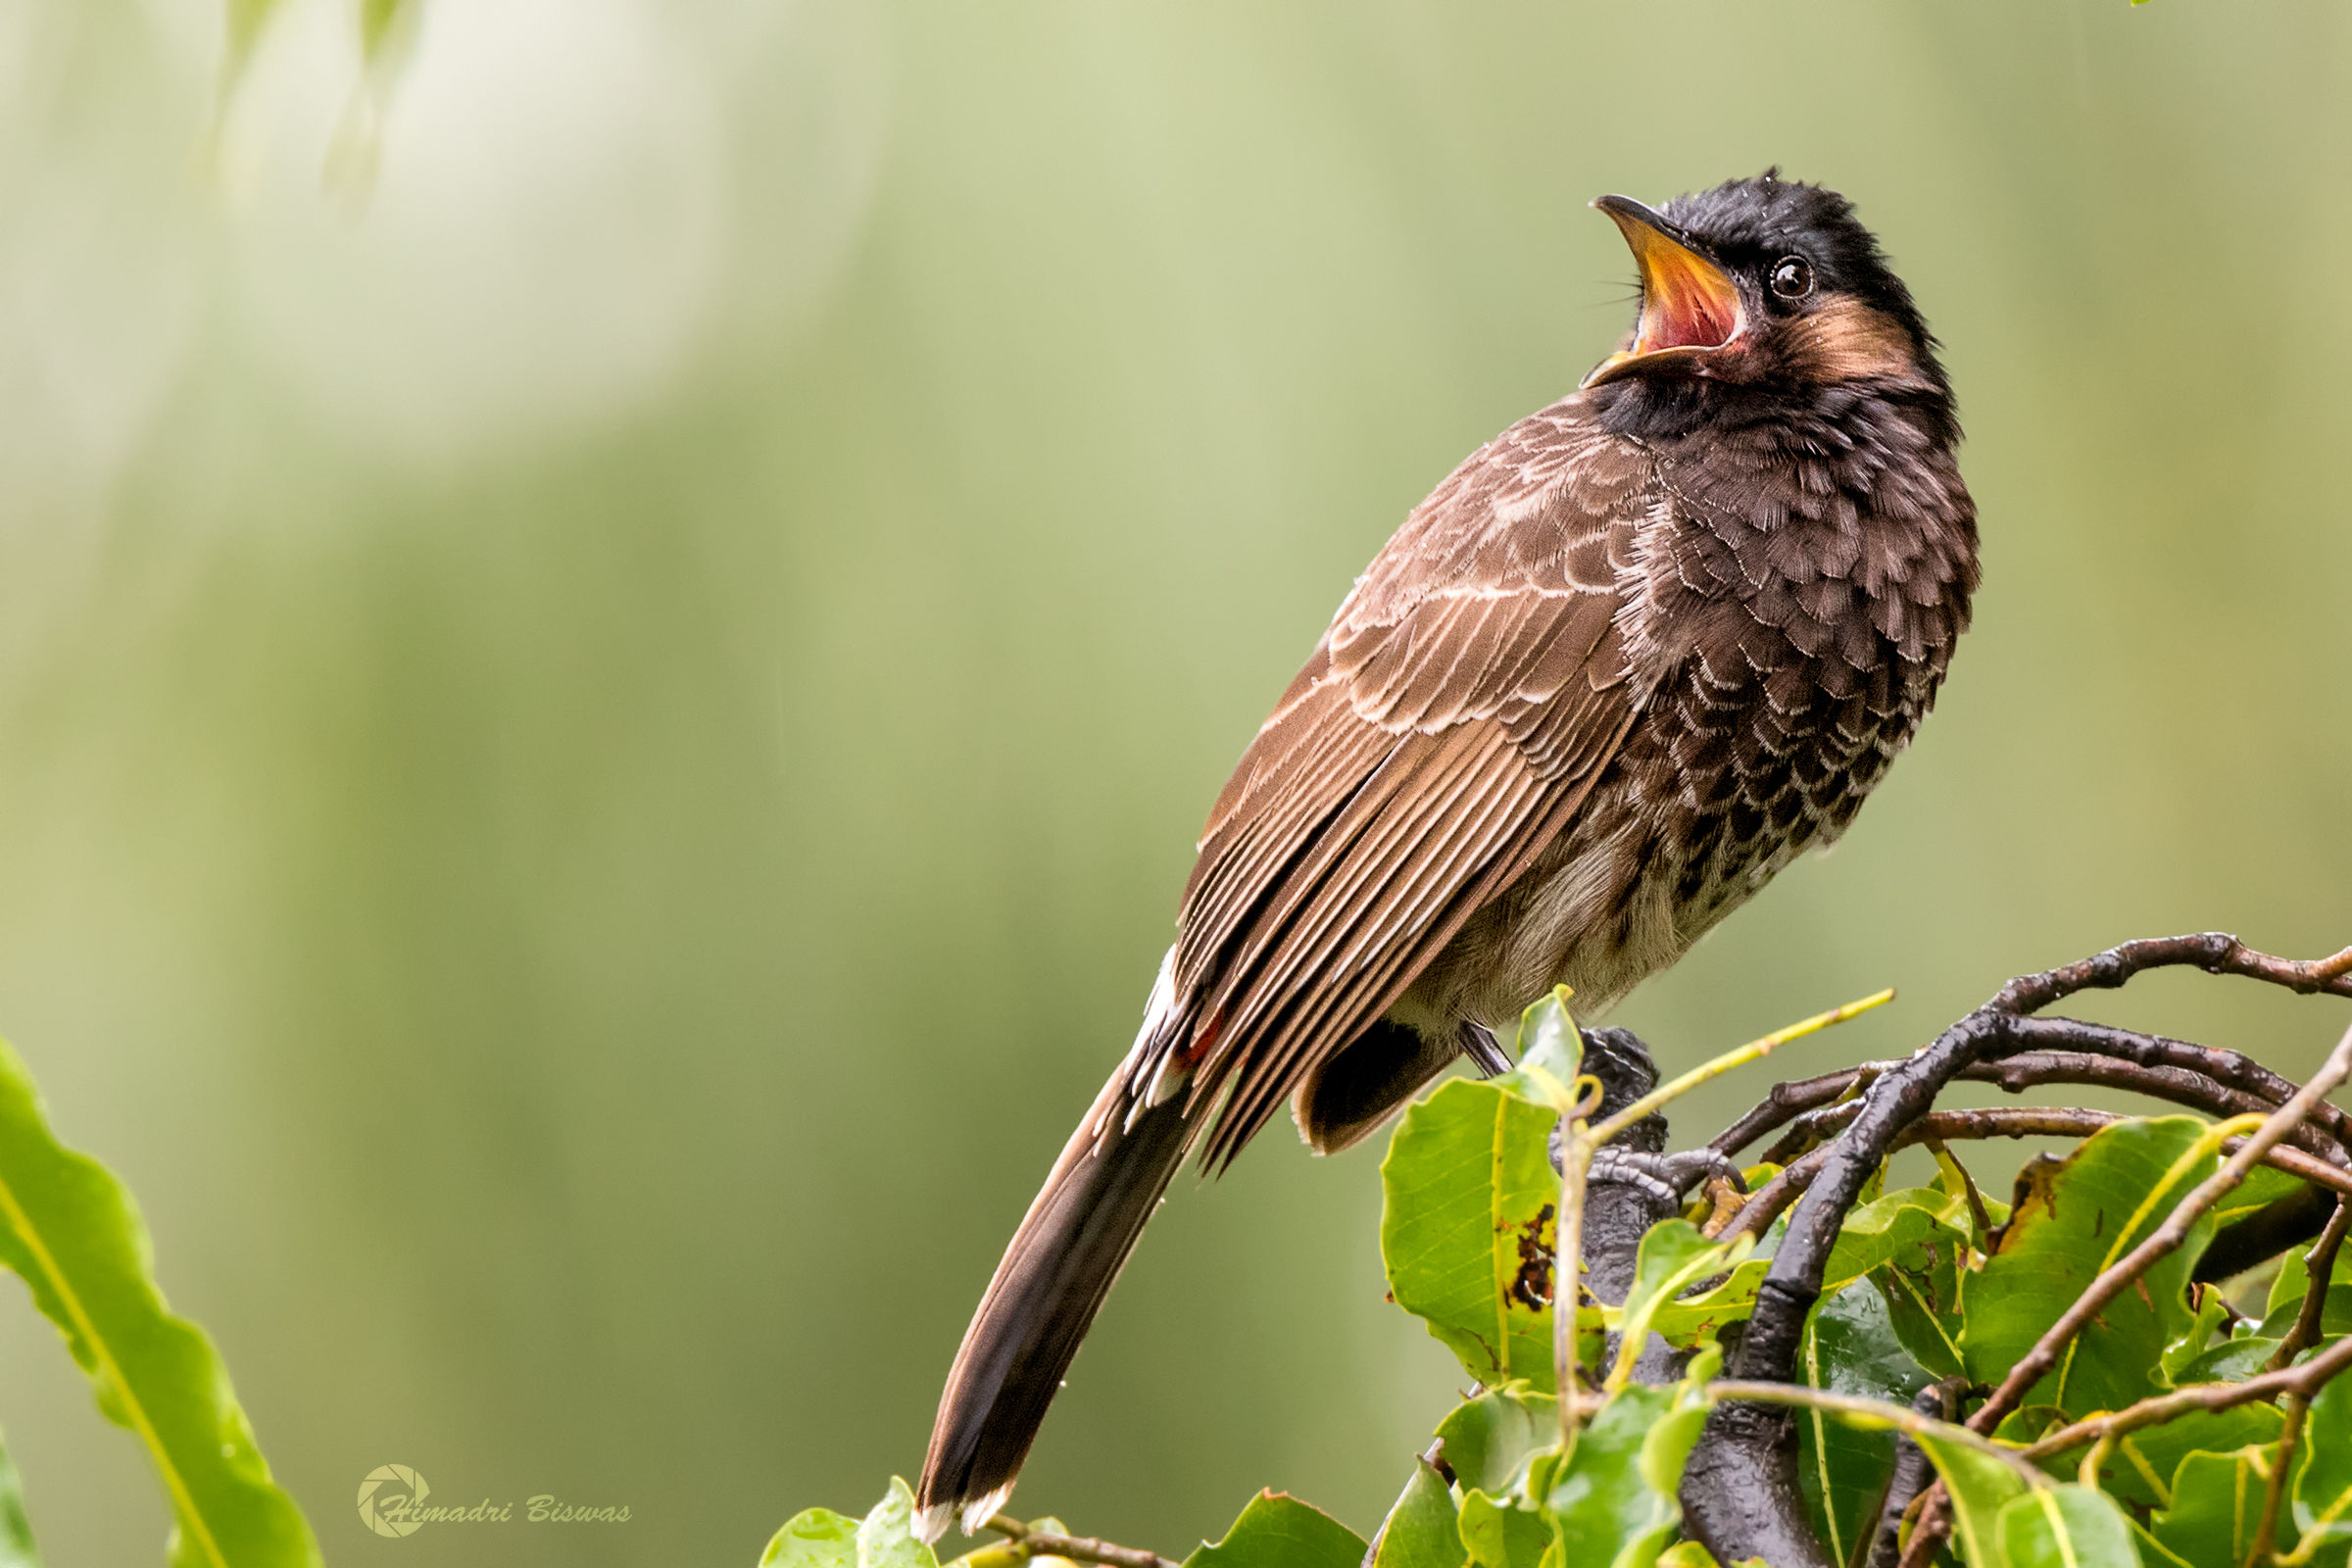 Red vented bulbul...